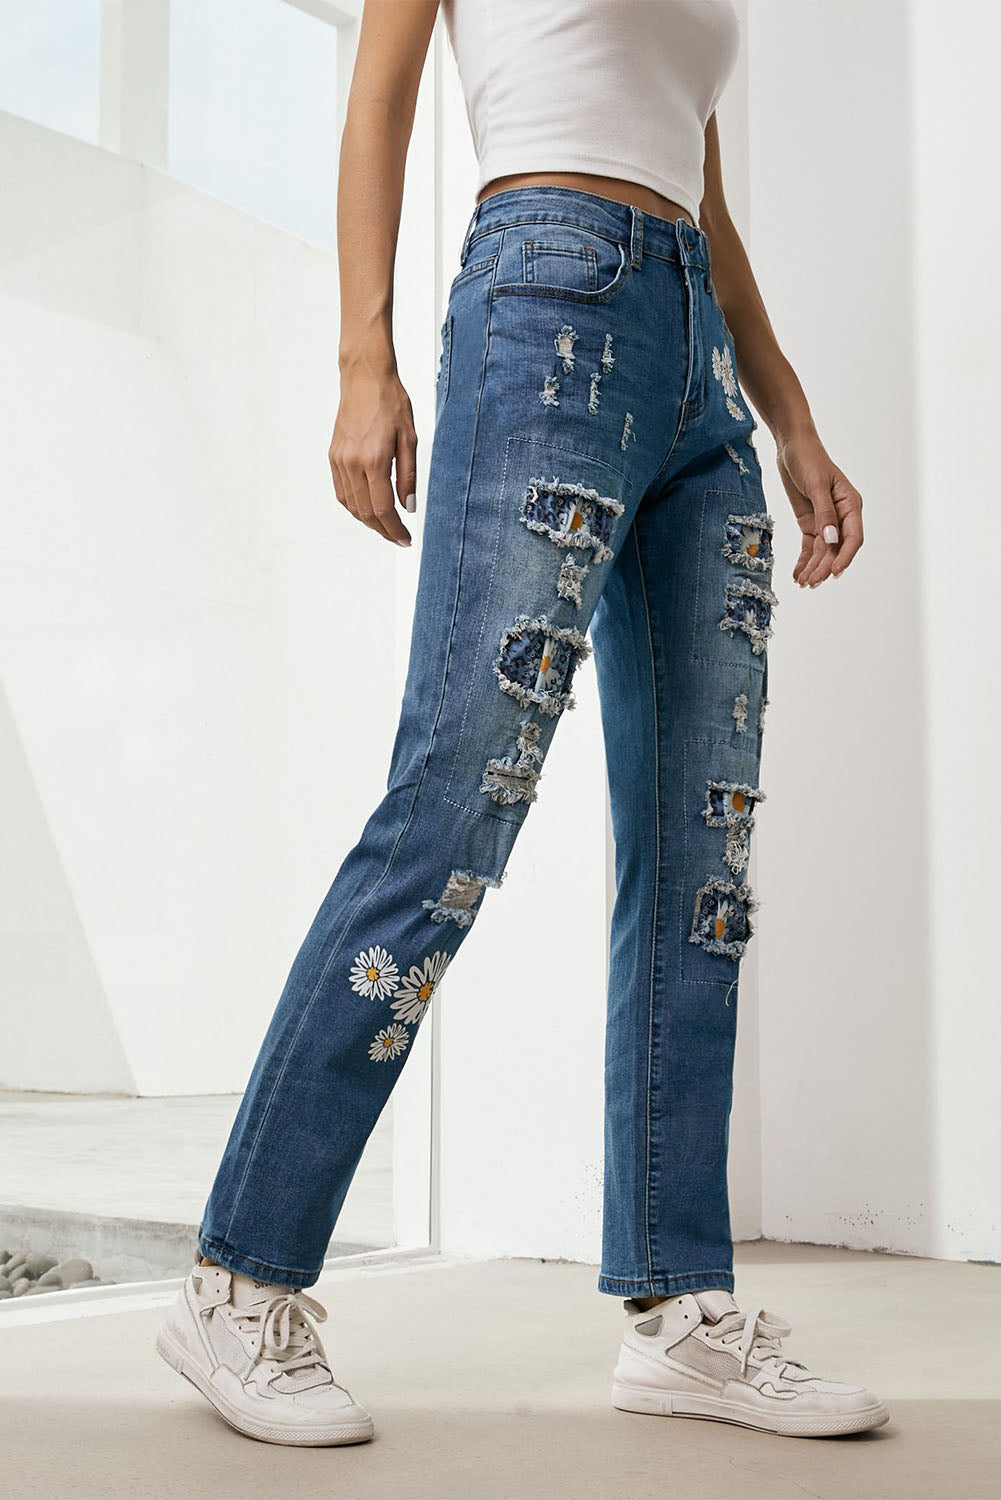 Printed Patch Distressed Boyfriend Jeans Print on any thing USA/STOD clothes